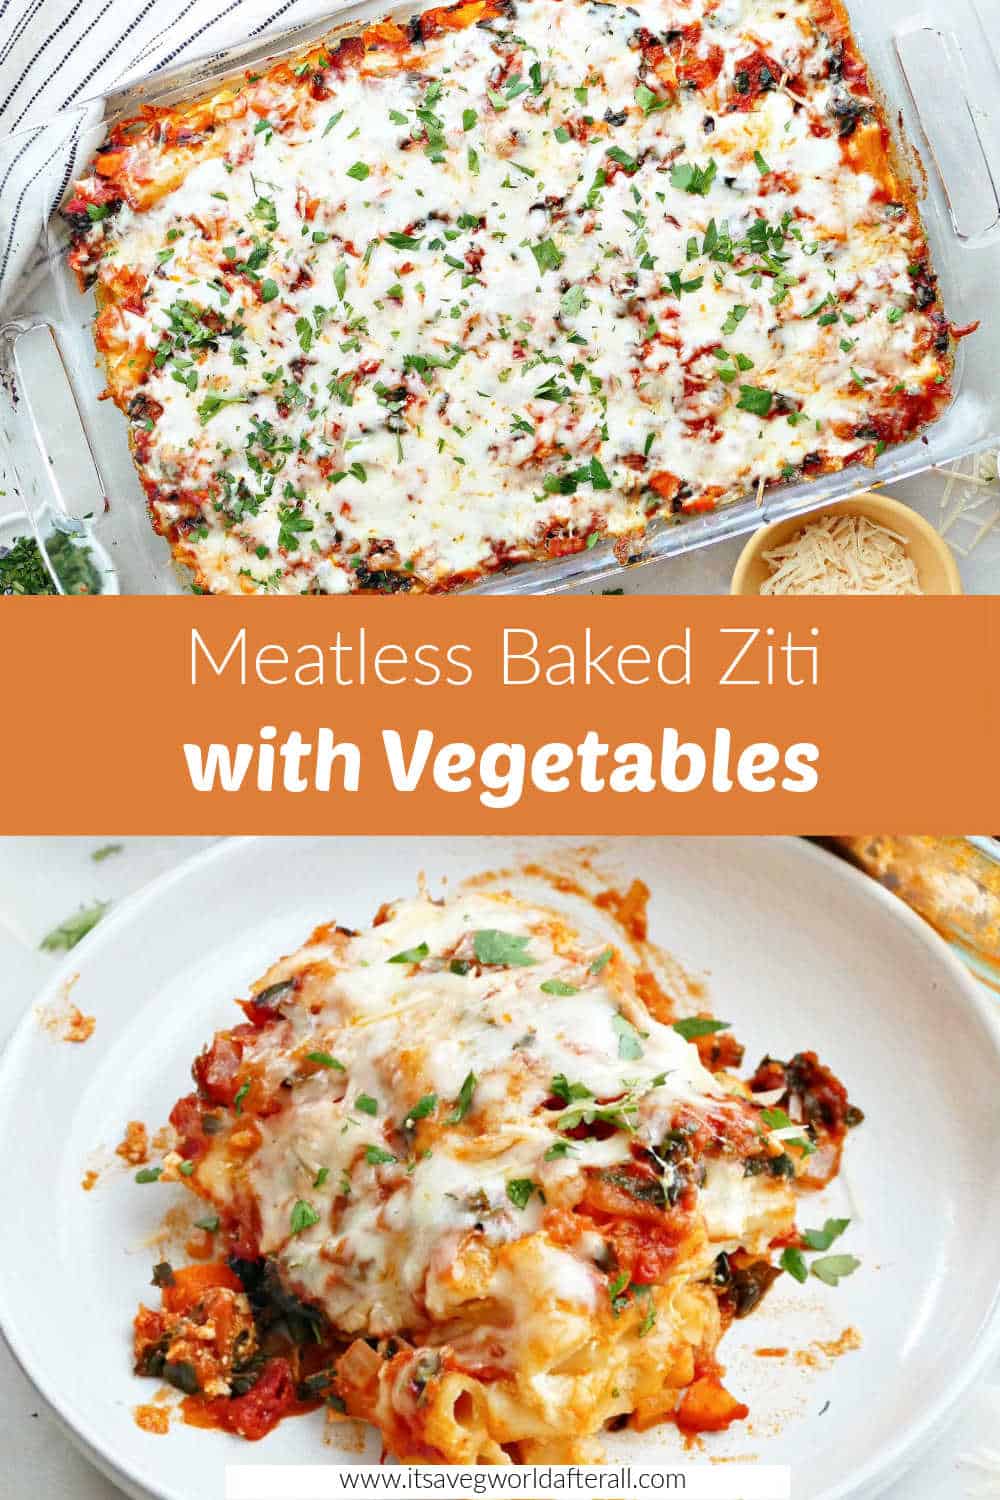 Meatless Baked Ziti with Vegetables - It's a Veg World After All®